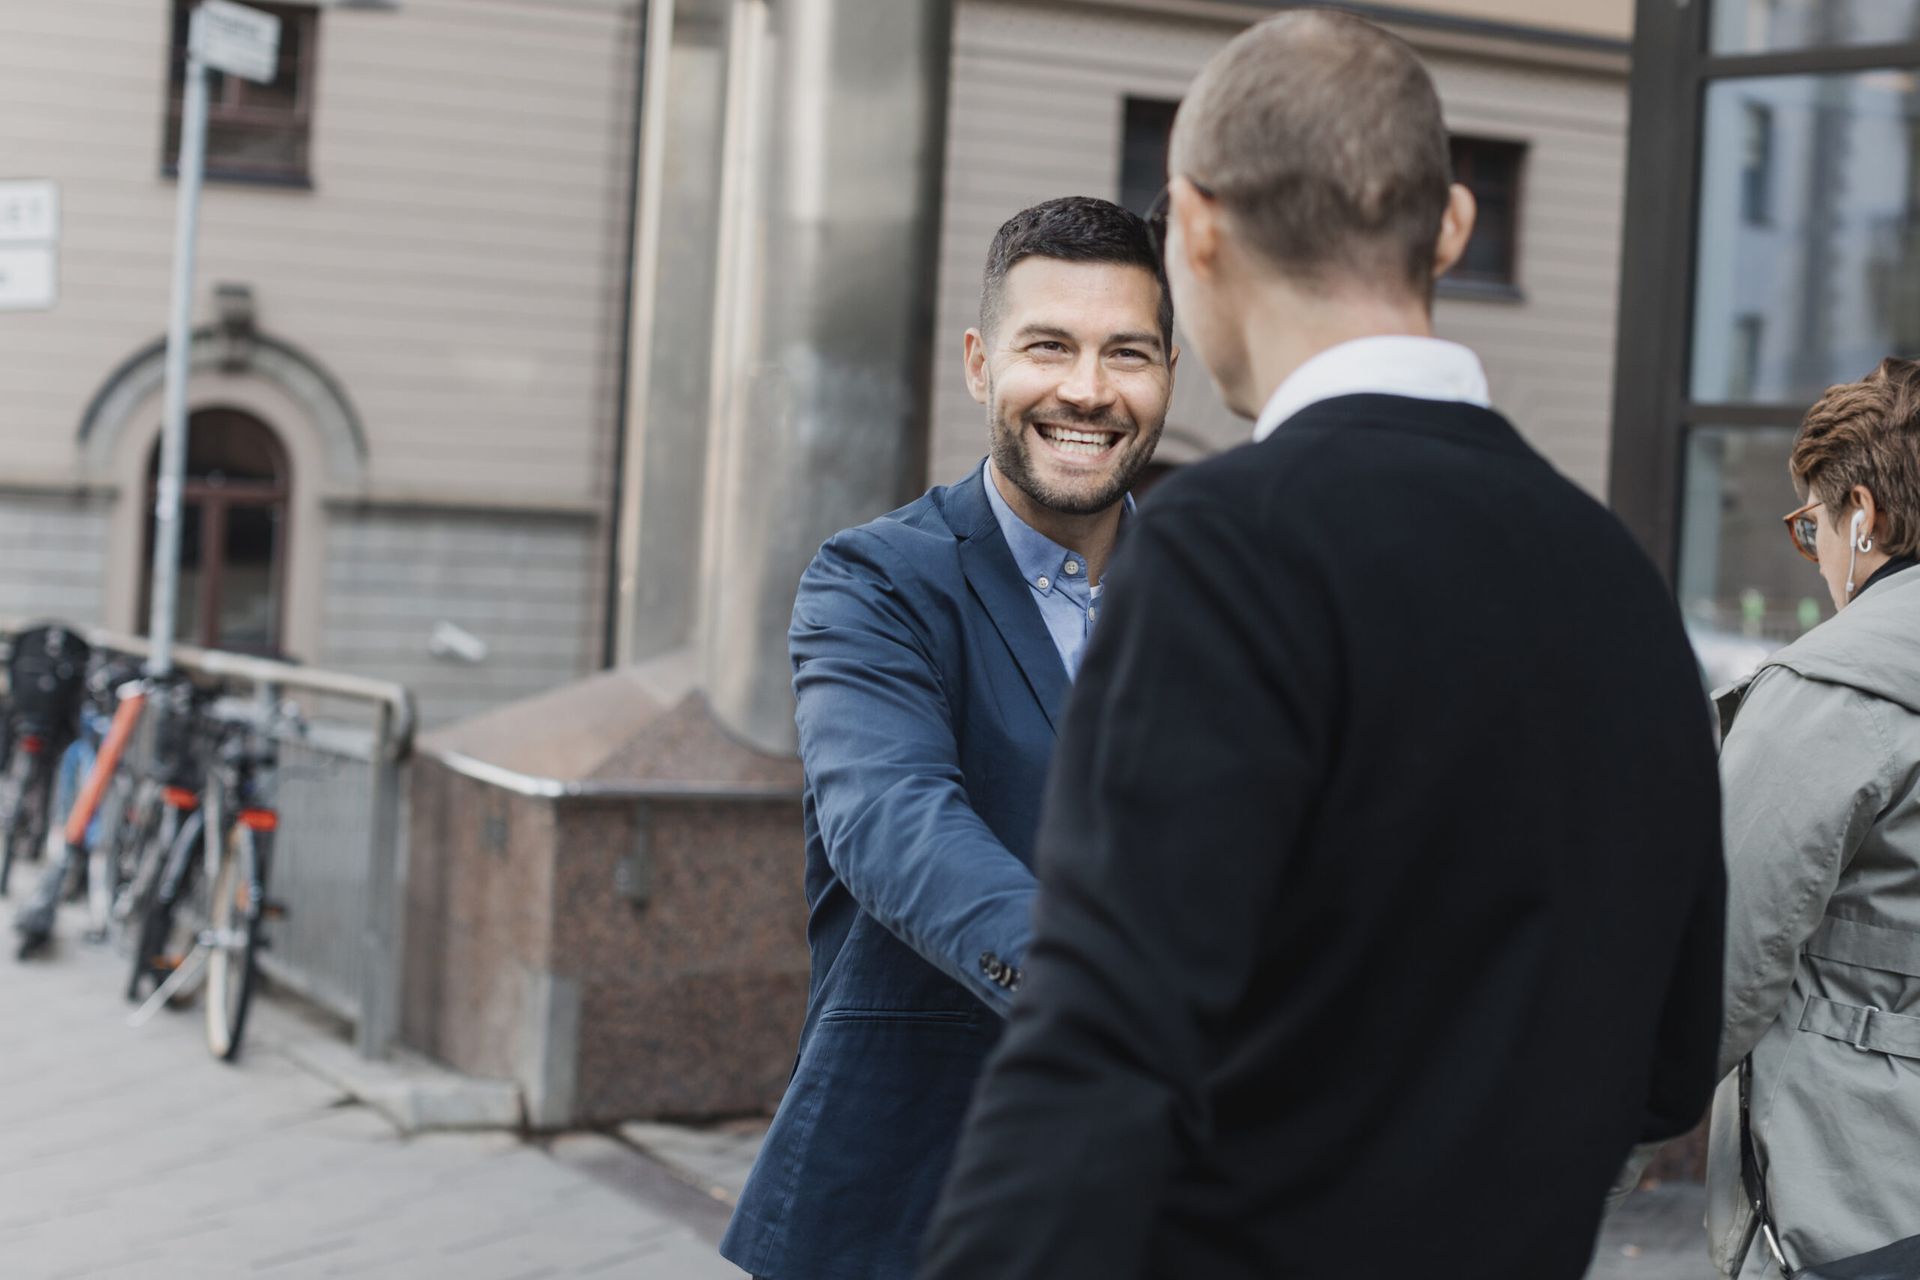 Man greeting another man on the street